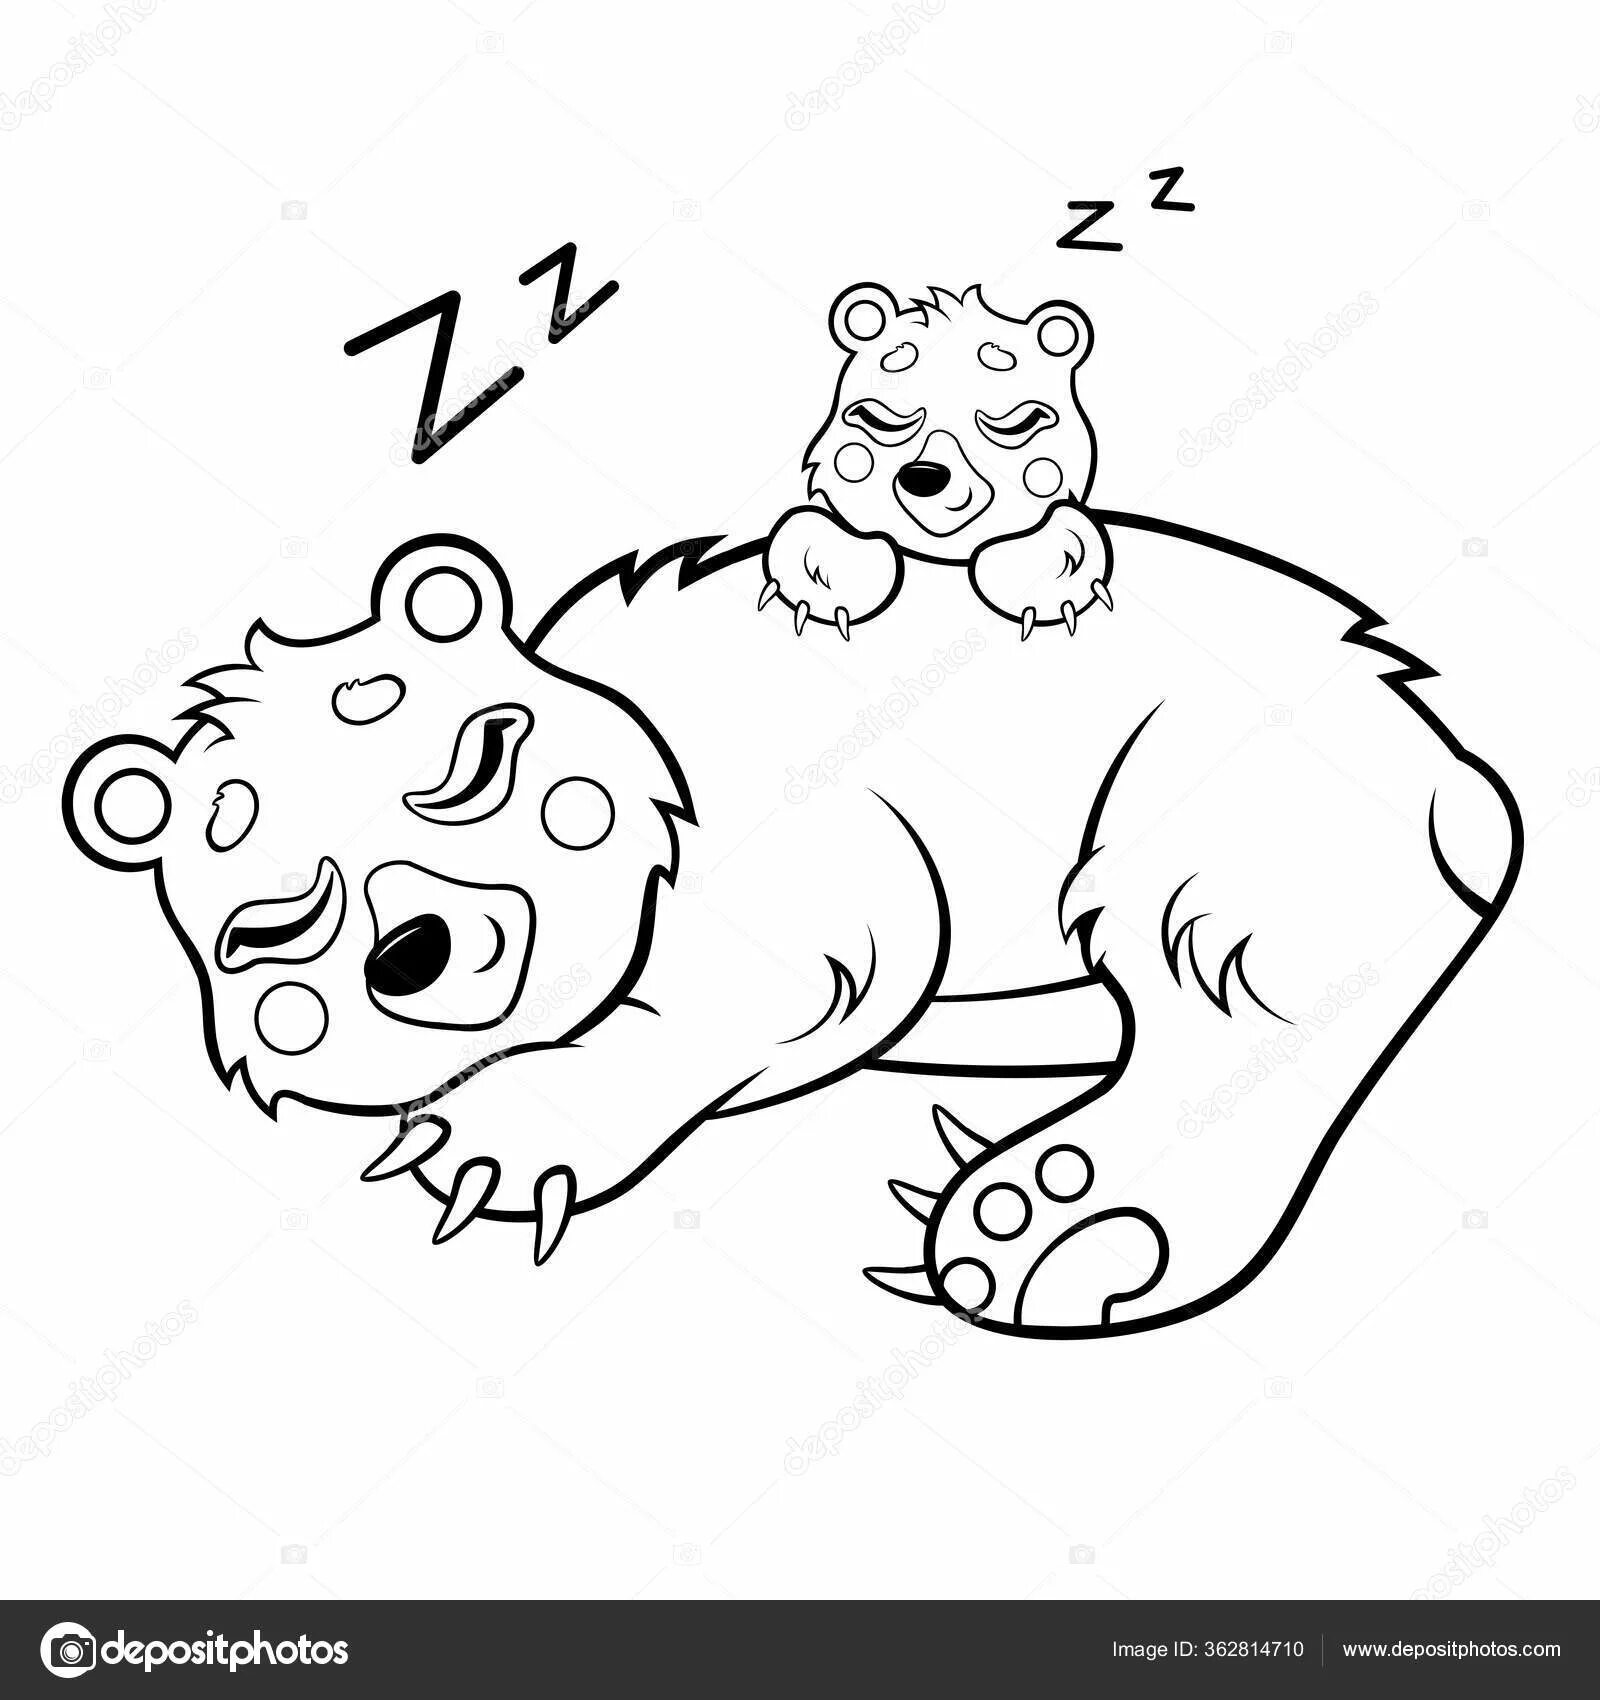 Calm bear in the den coloring page